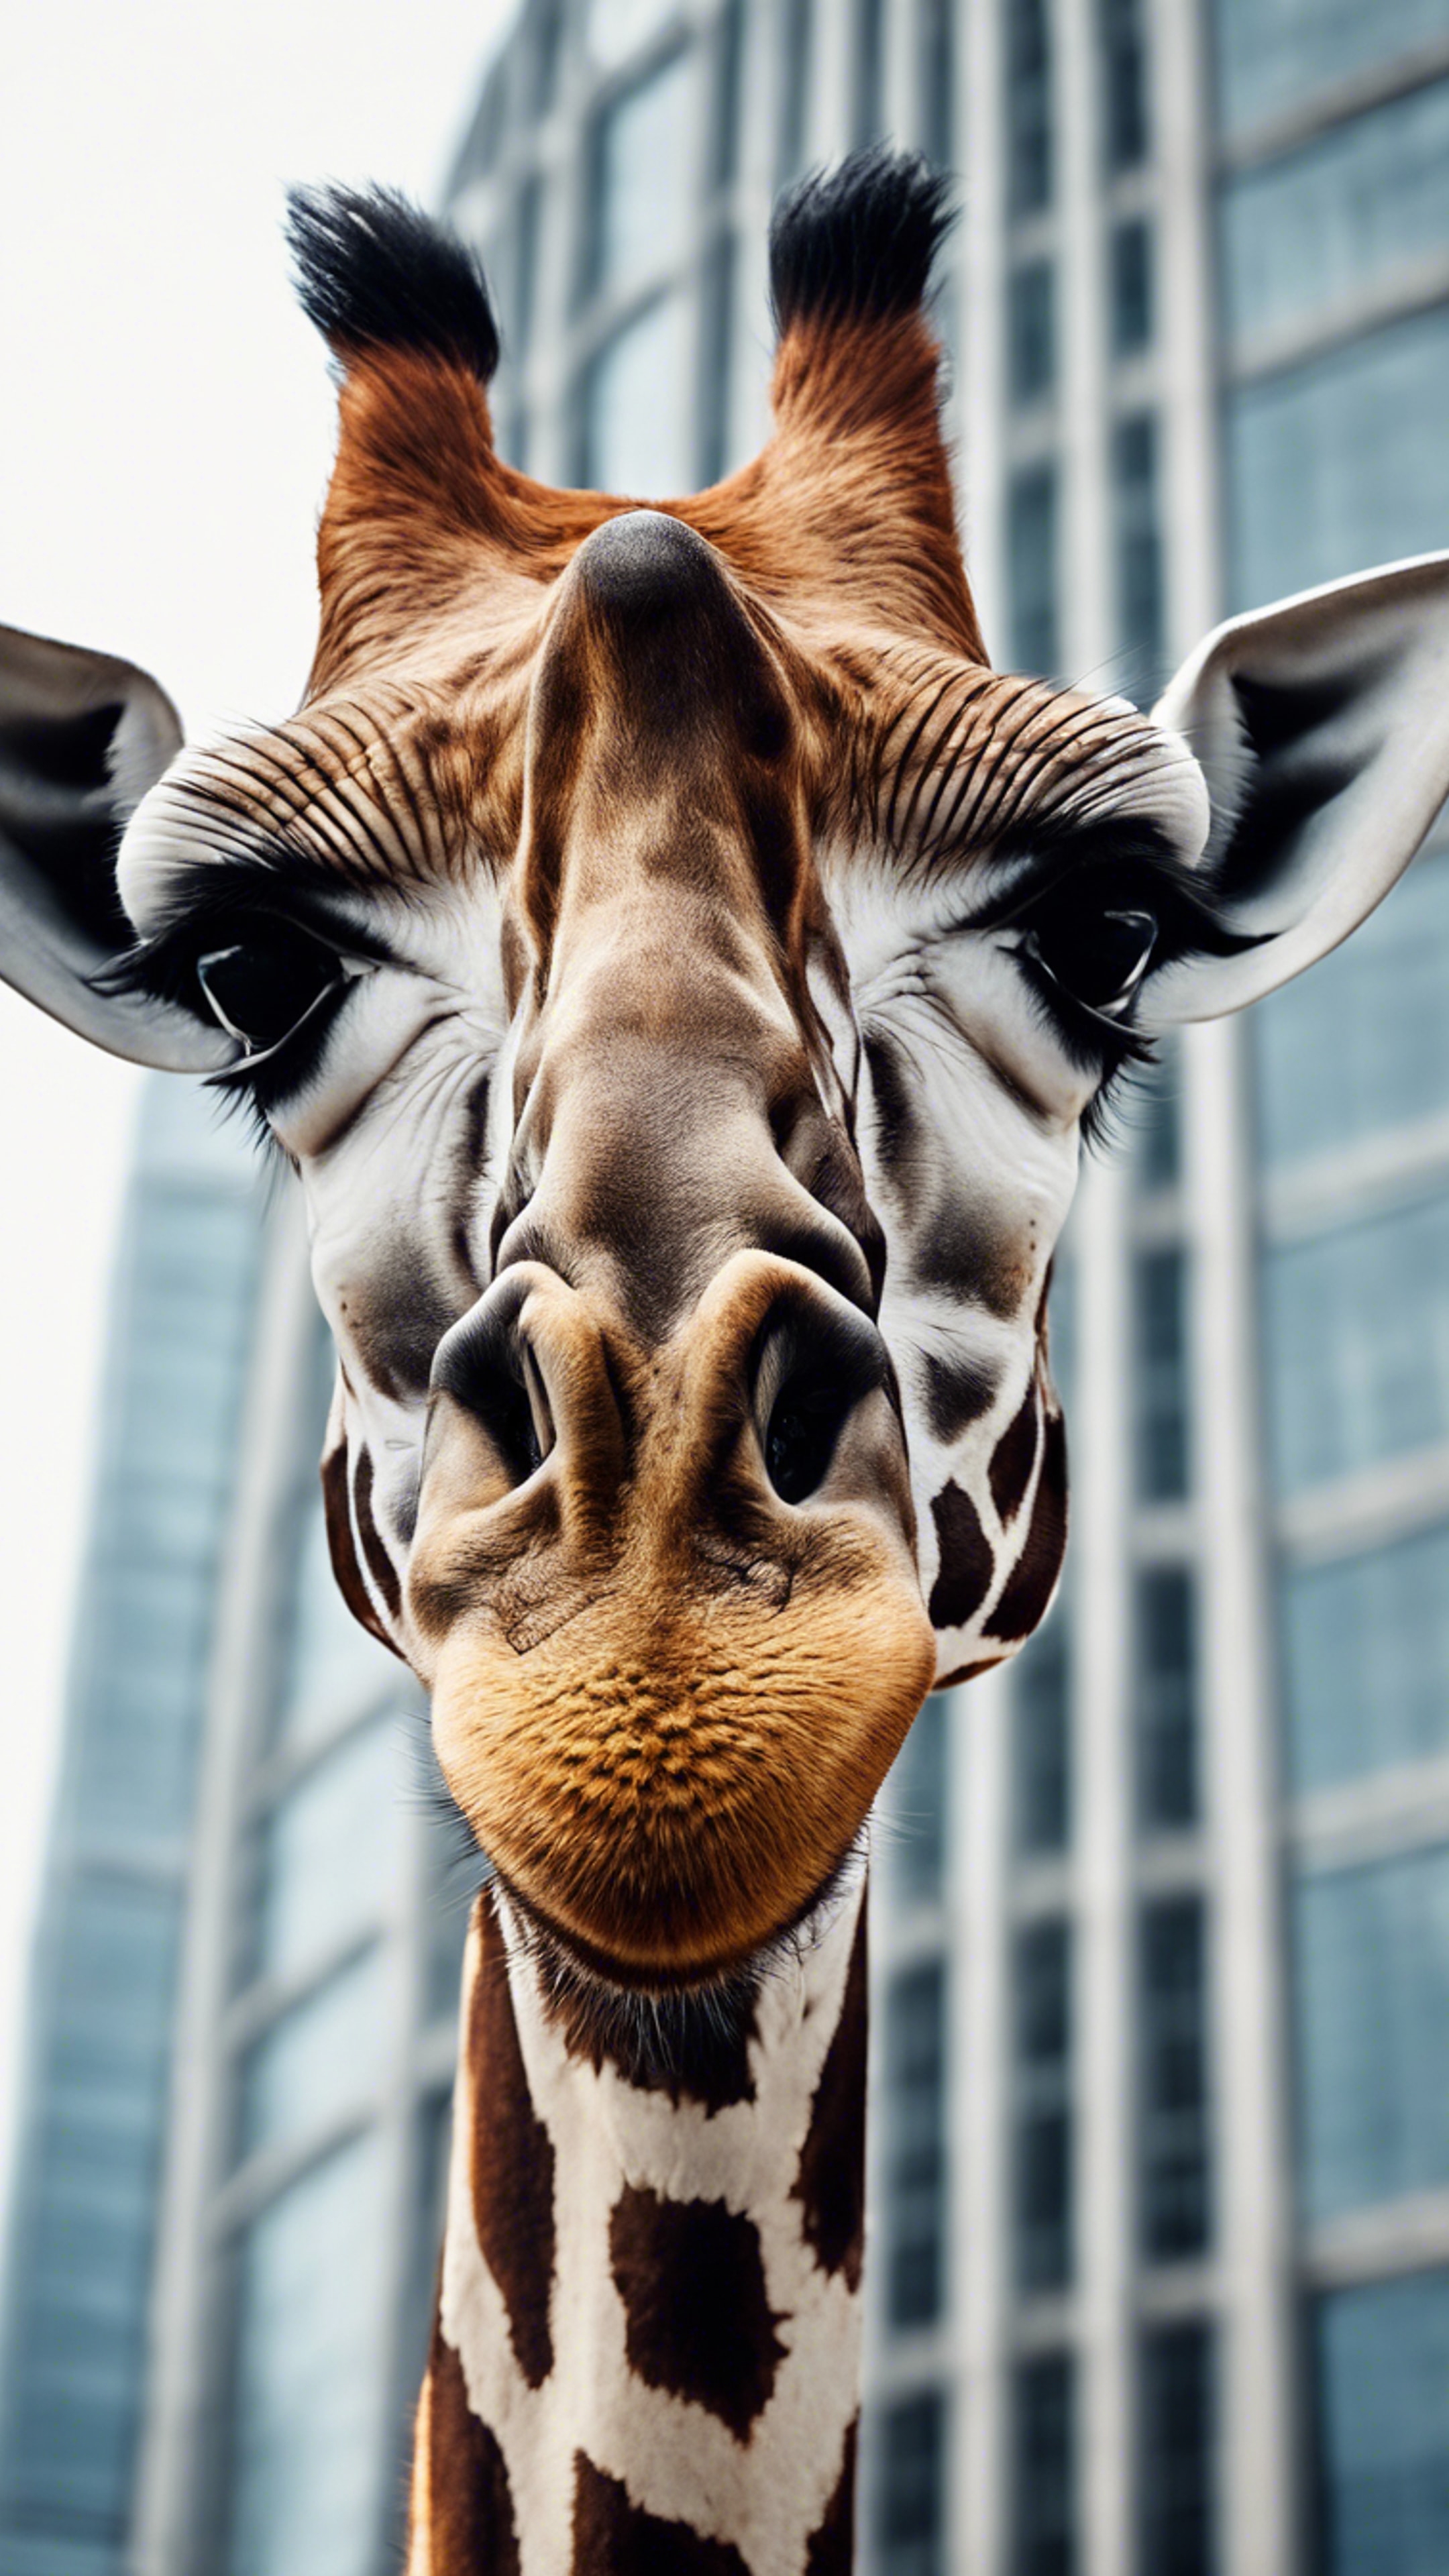 A giraffe in an urban setting, poking its head out from behind a skyscraper, symbolising wild nature confronting urbanisation. 牆紙[4646bbcdc786429d9f19]